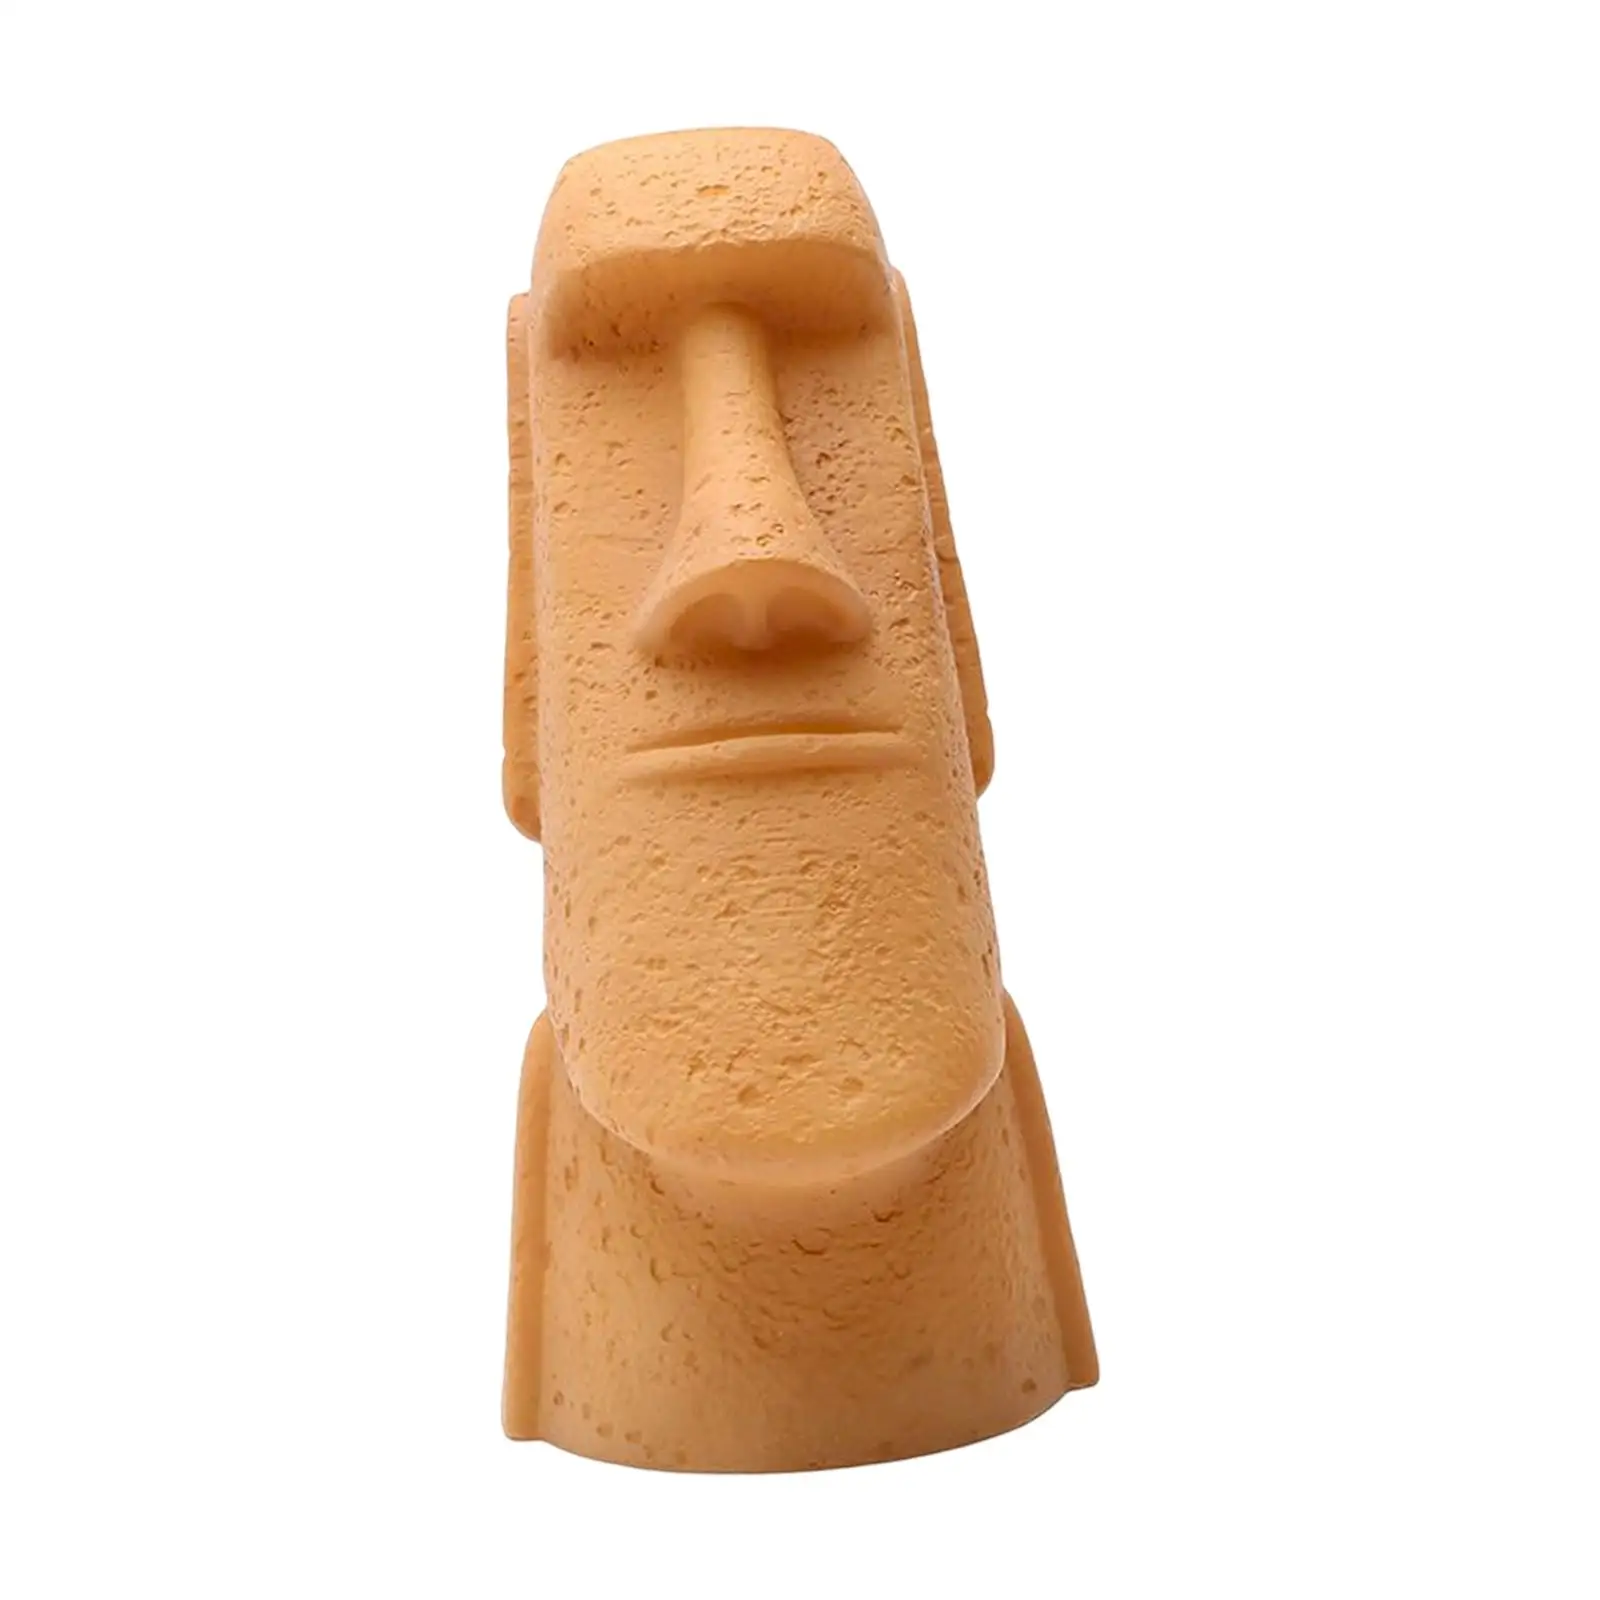 Easter Island Head Statue Light Bedside Lamp Battery Operated Resin Figurine